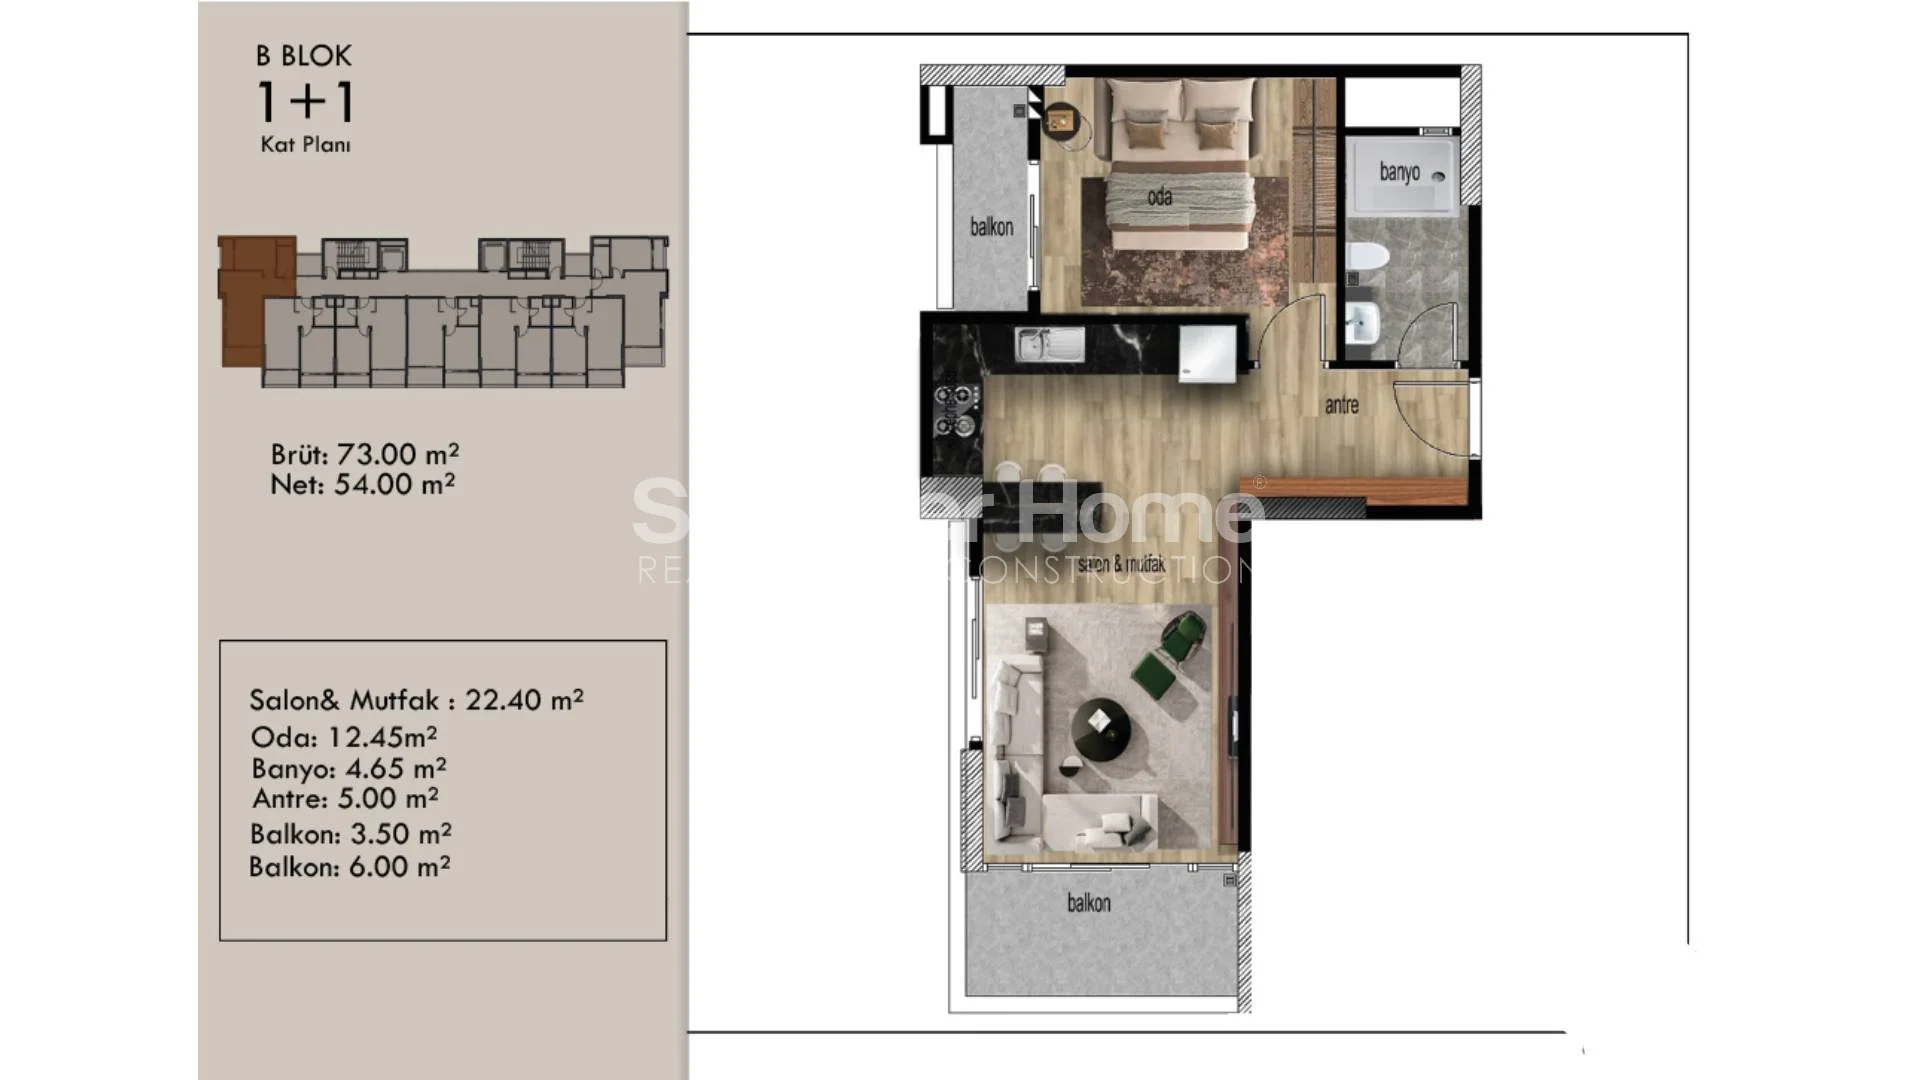 Cheap One-Bedroom Apartments in Arpacbahsis, Mersin Plan - 28